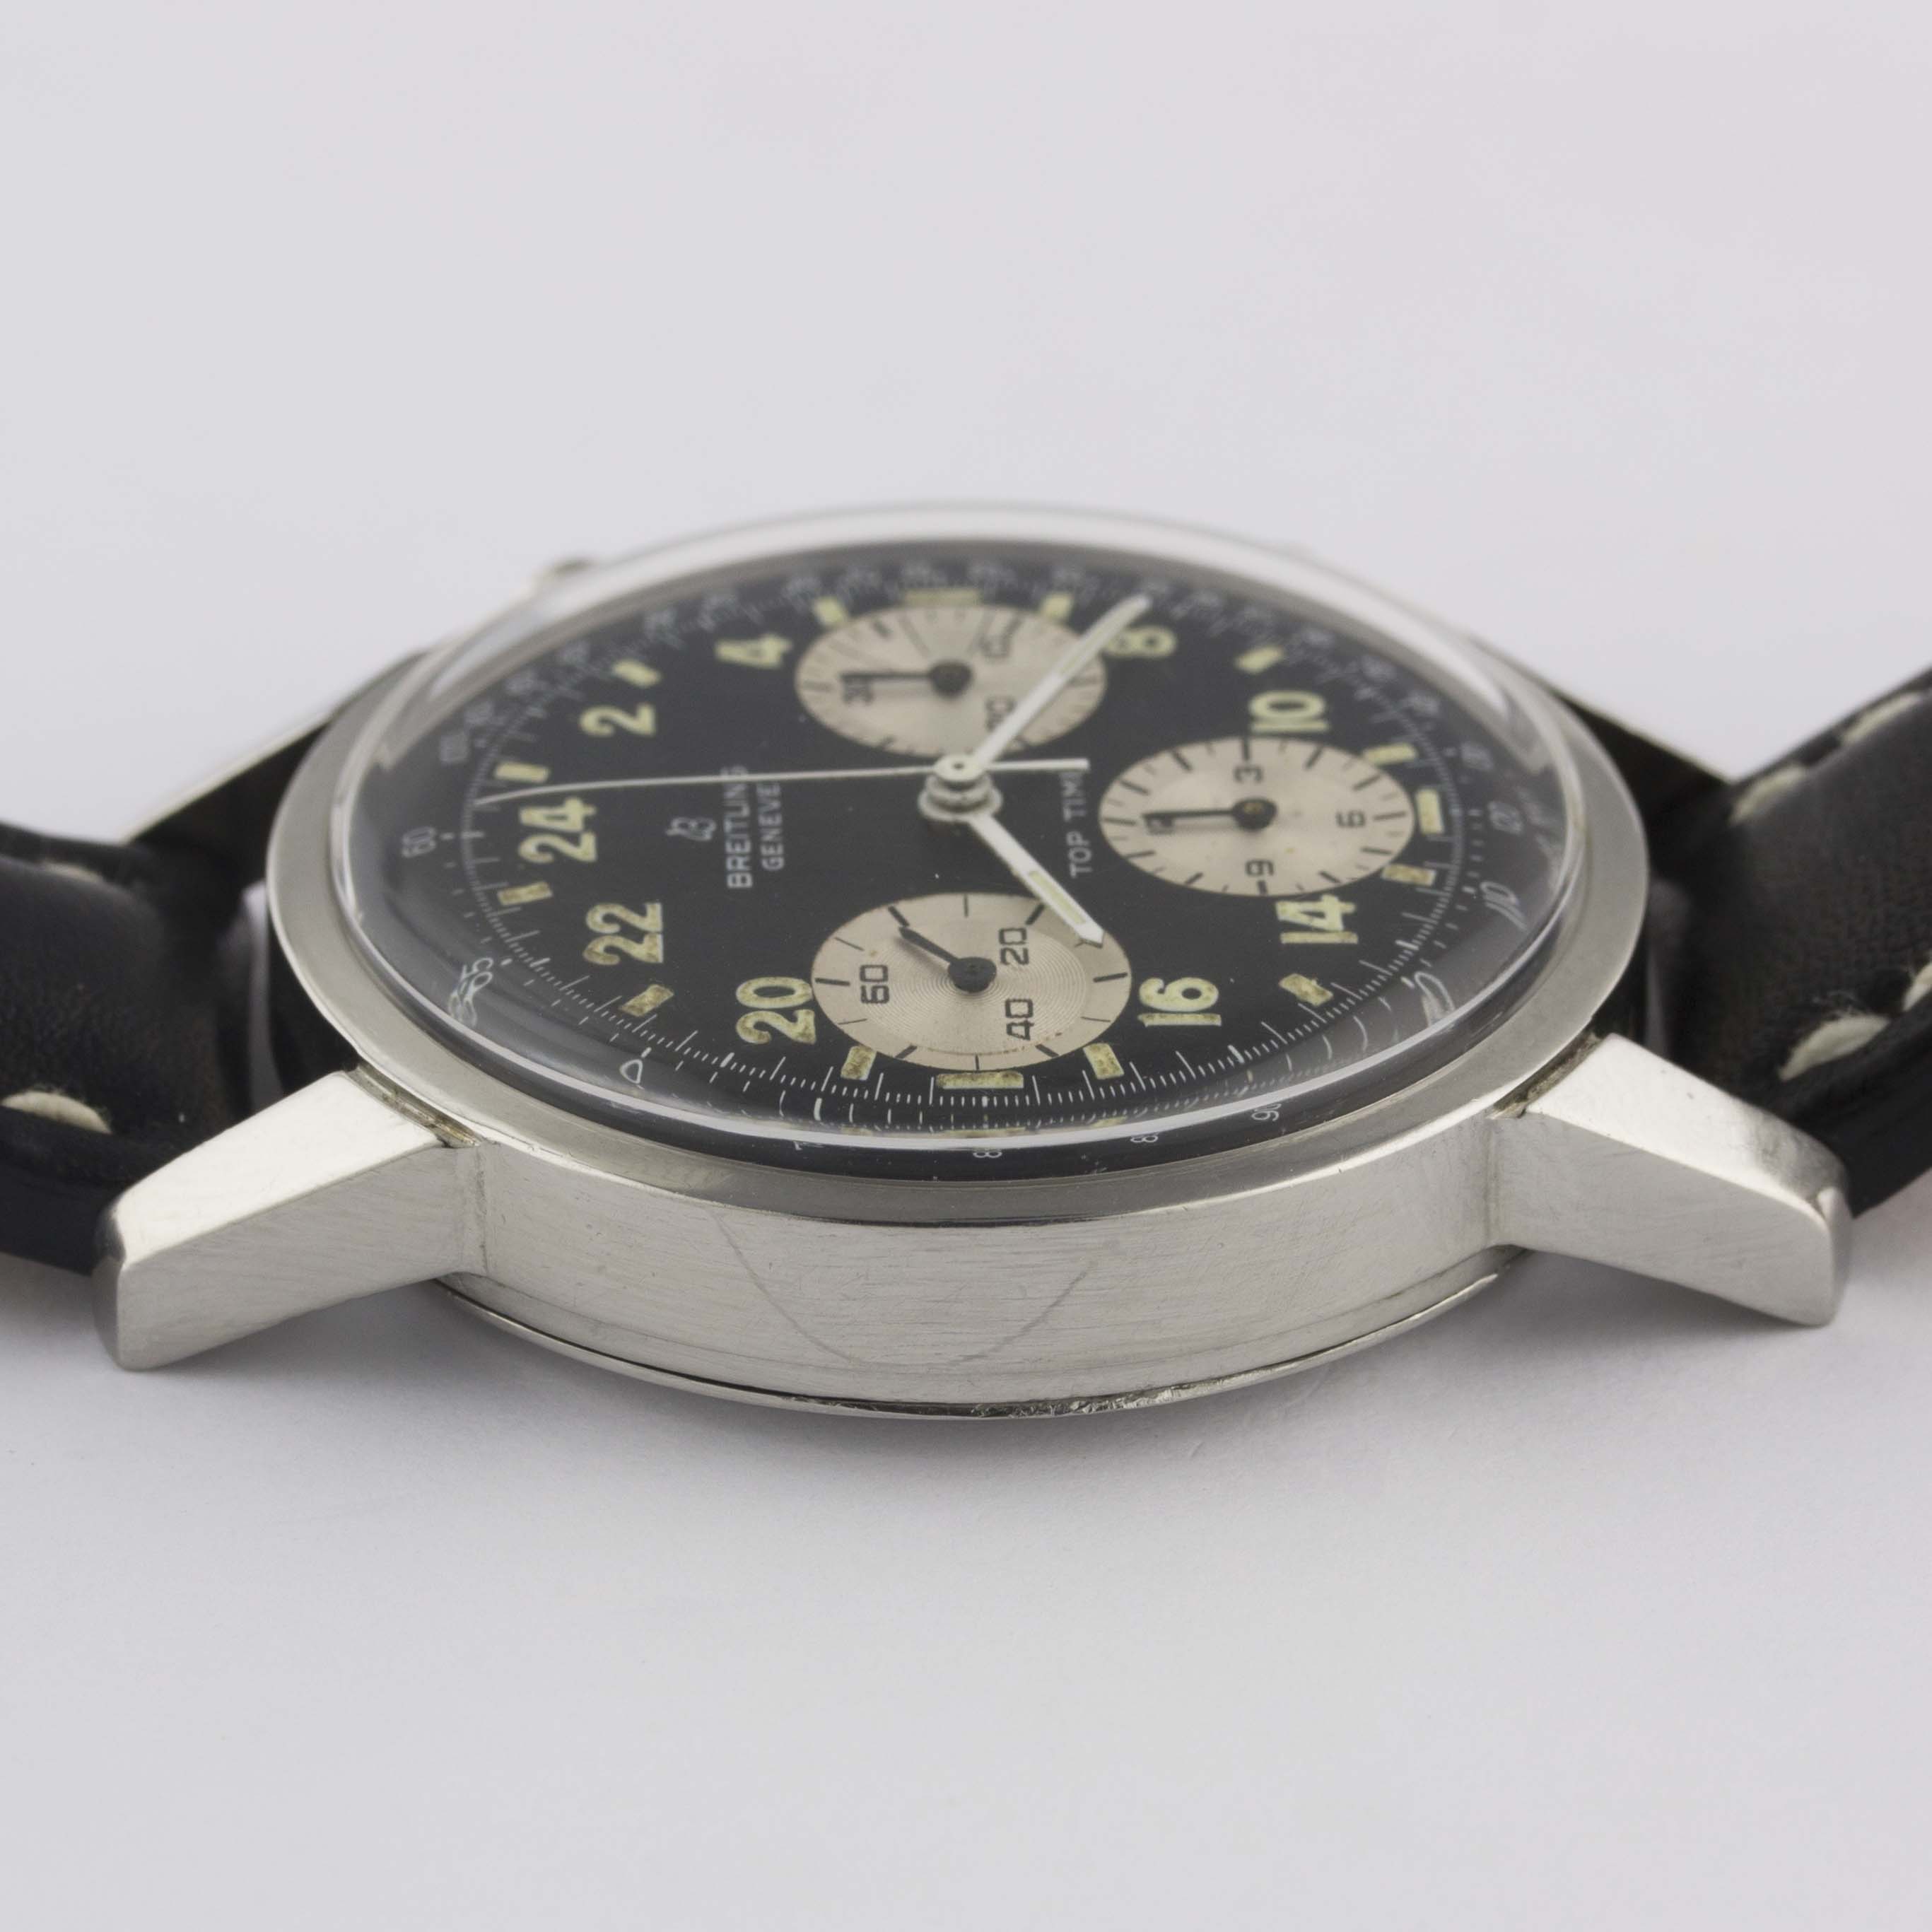 A RARE GENTLEMAN'S STAINLESS STEEL BREITLING TOP TIME 24 HOUR CHRONOGRAPH WRIST WATCH CIRCA 1968, - Image 12 of 12